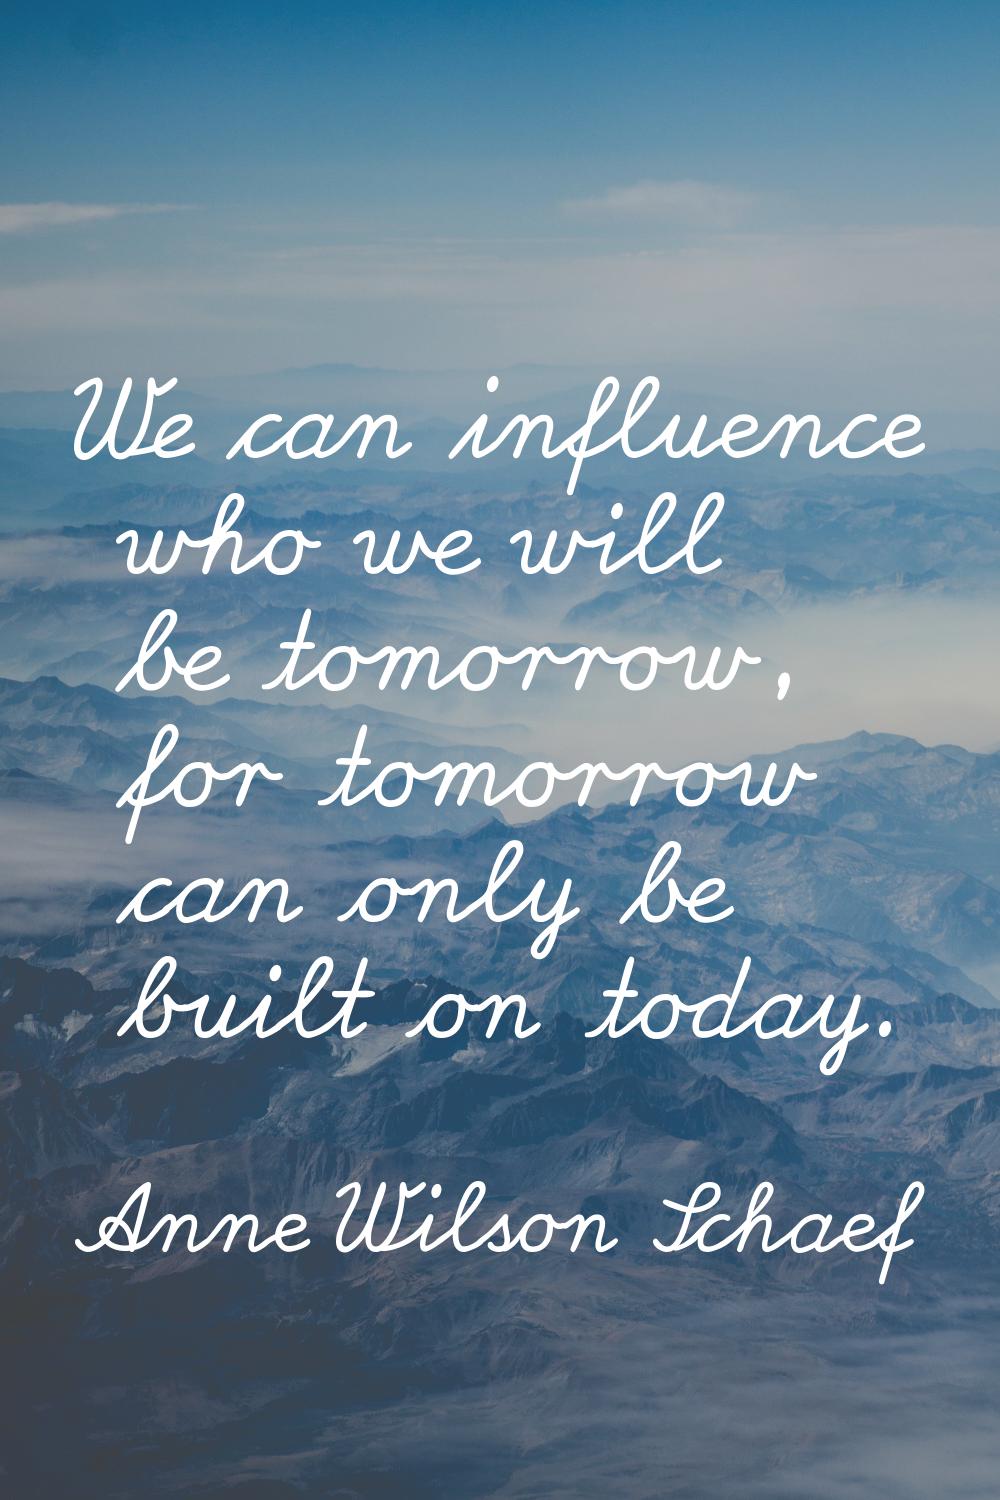 We can influence who we will be tomorrow, for tomorrow can only be built on today.